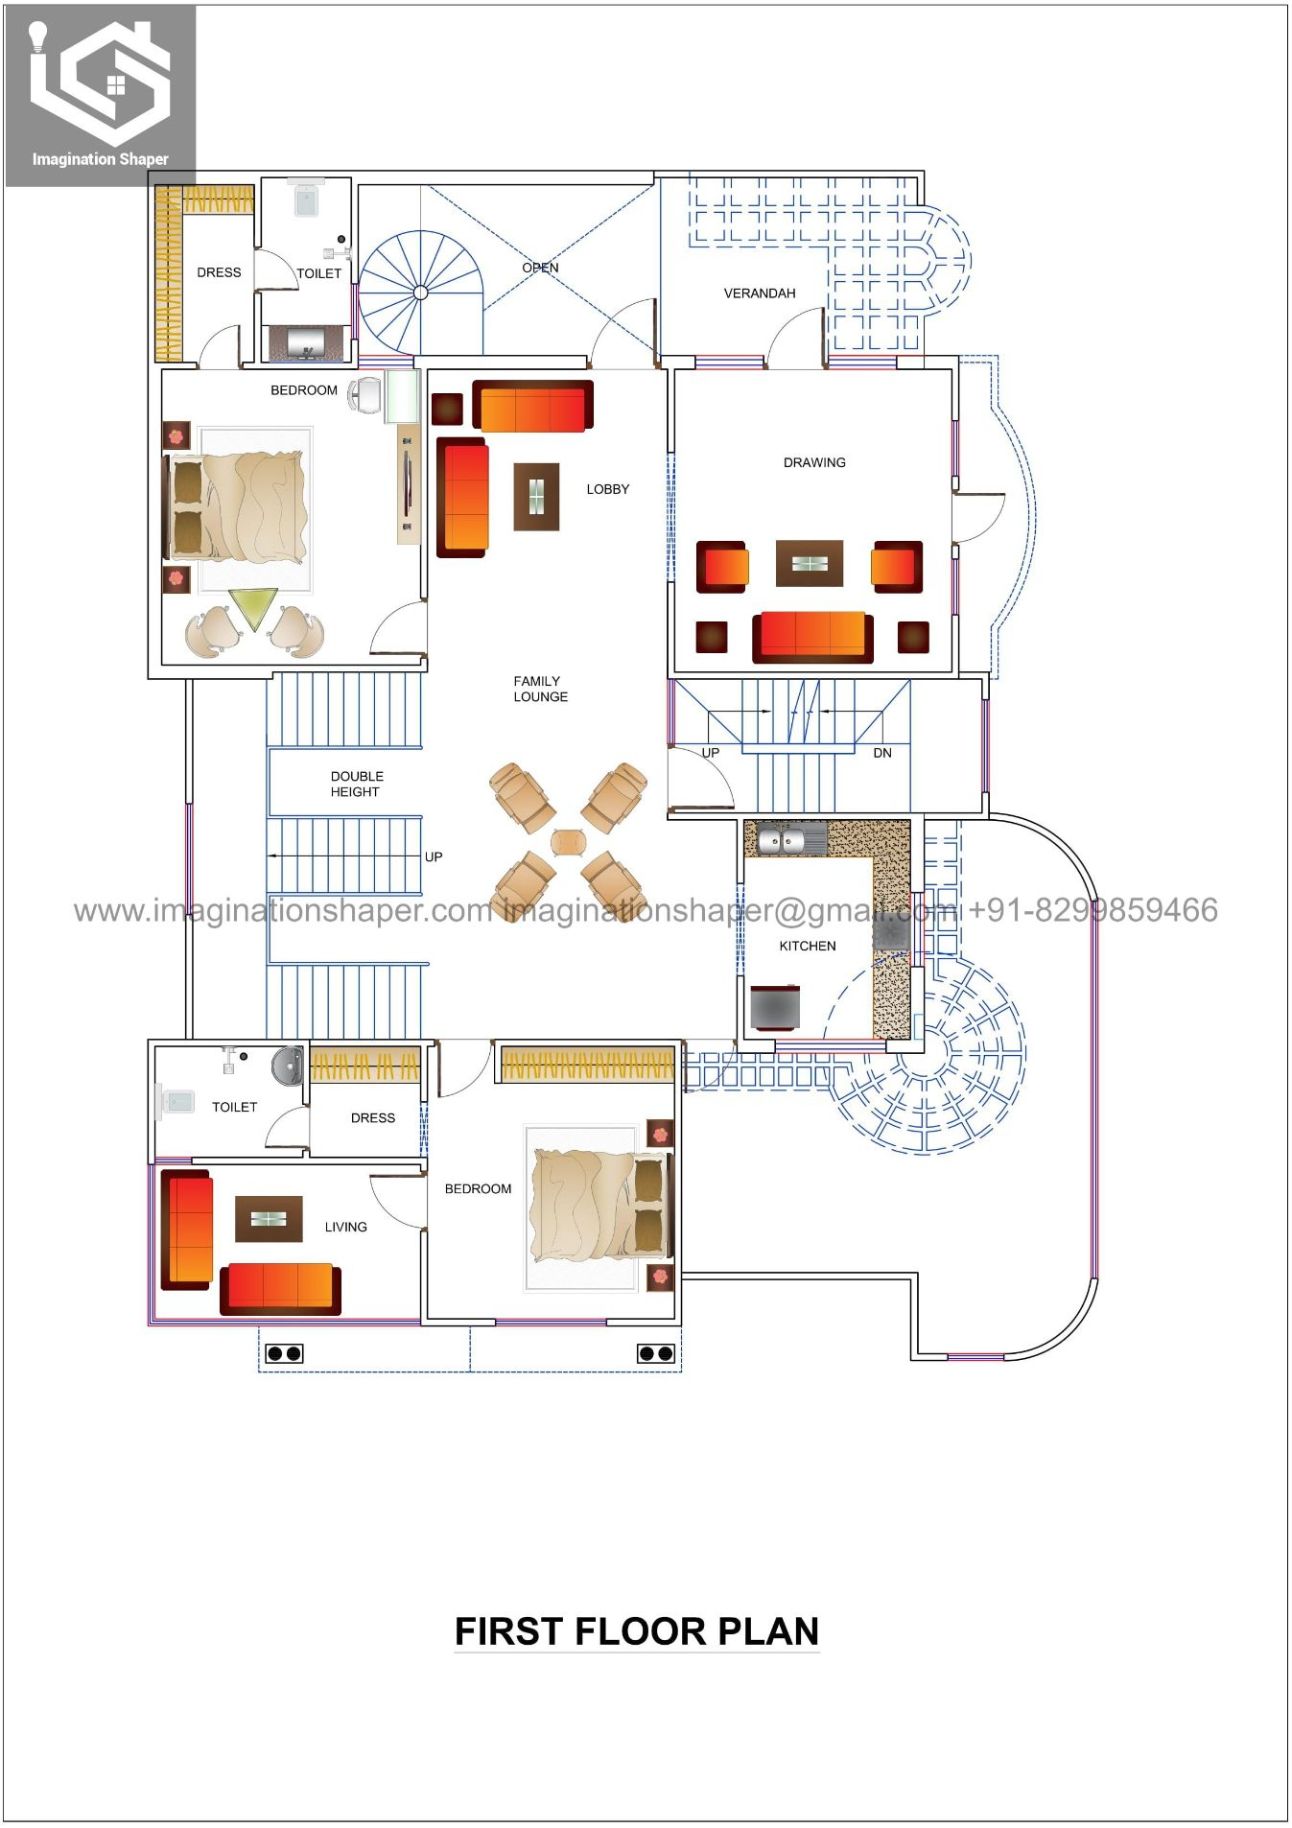 house-plan-drawing-first653